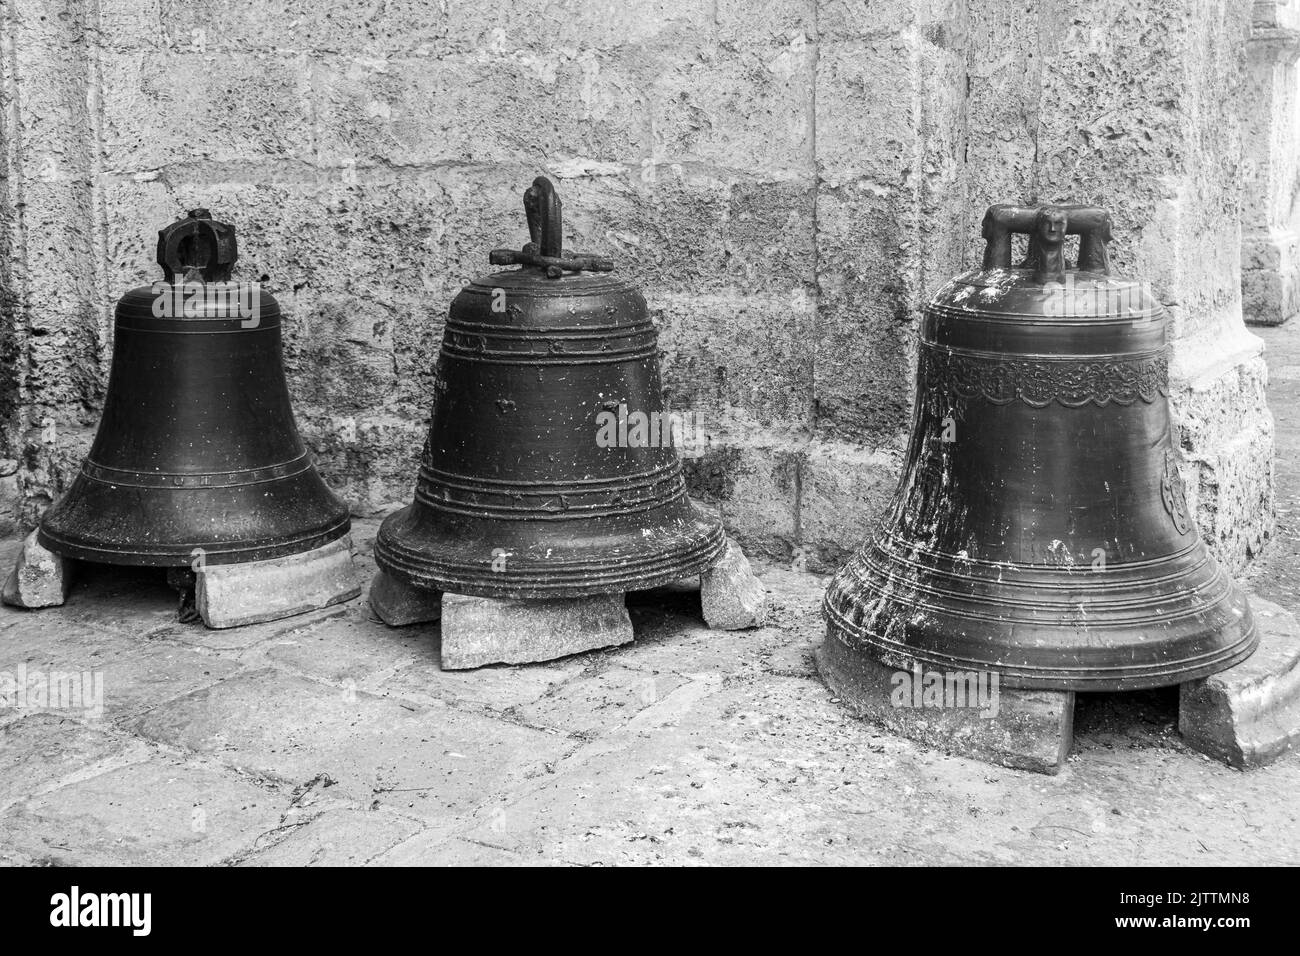 Three bells in black and white outside of a church, Havana, Cuba. Stock Photo